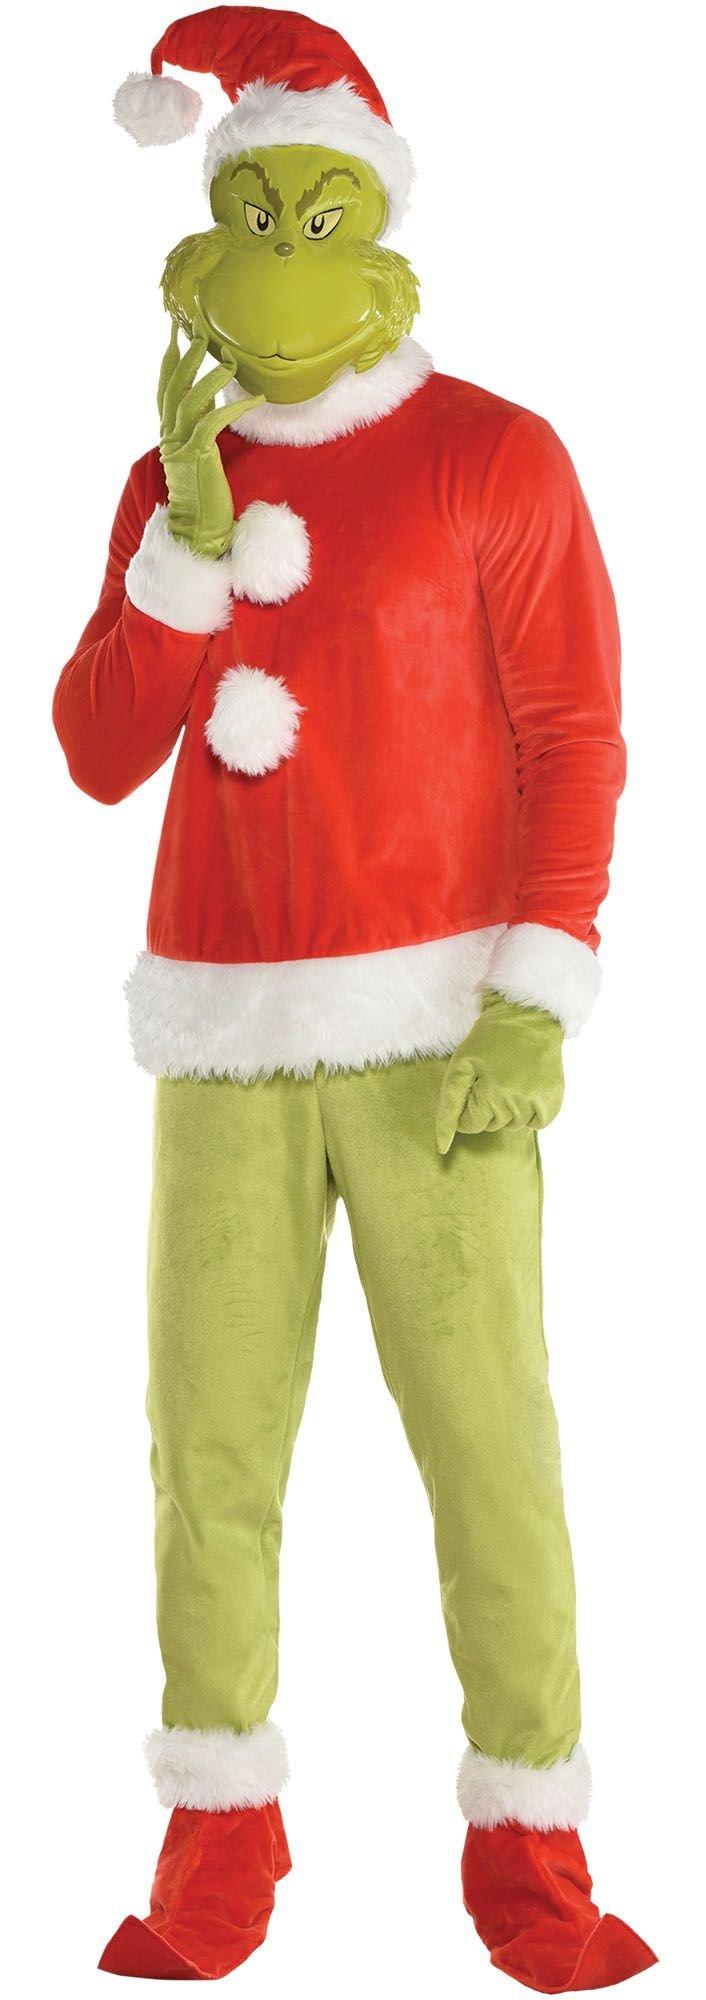 Grinch costume party city